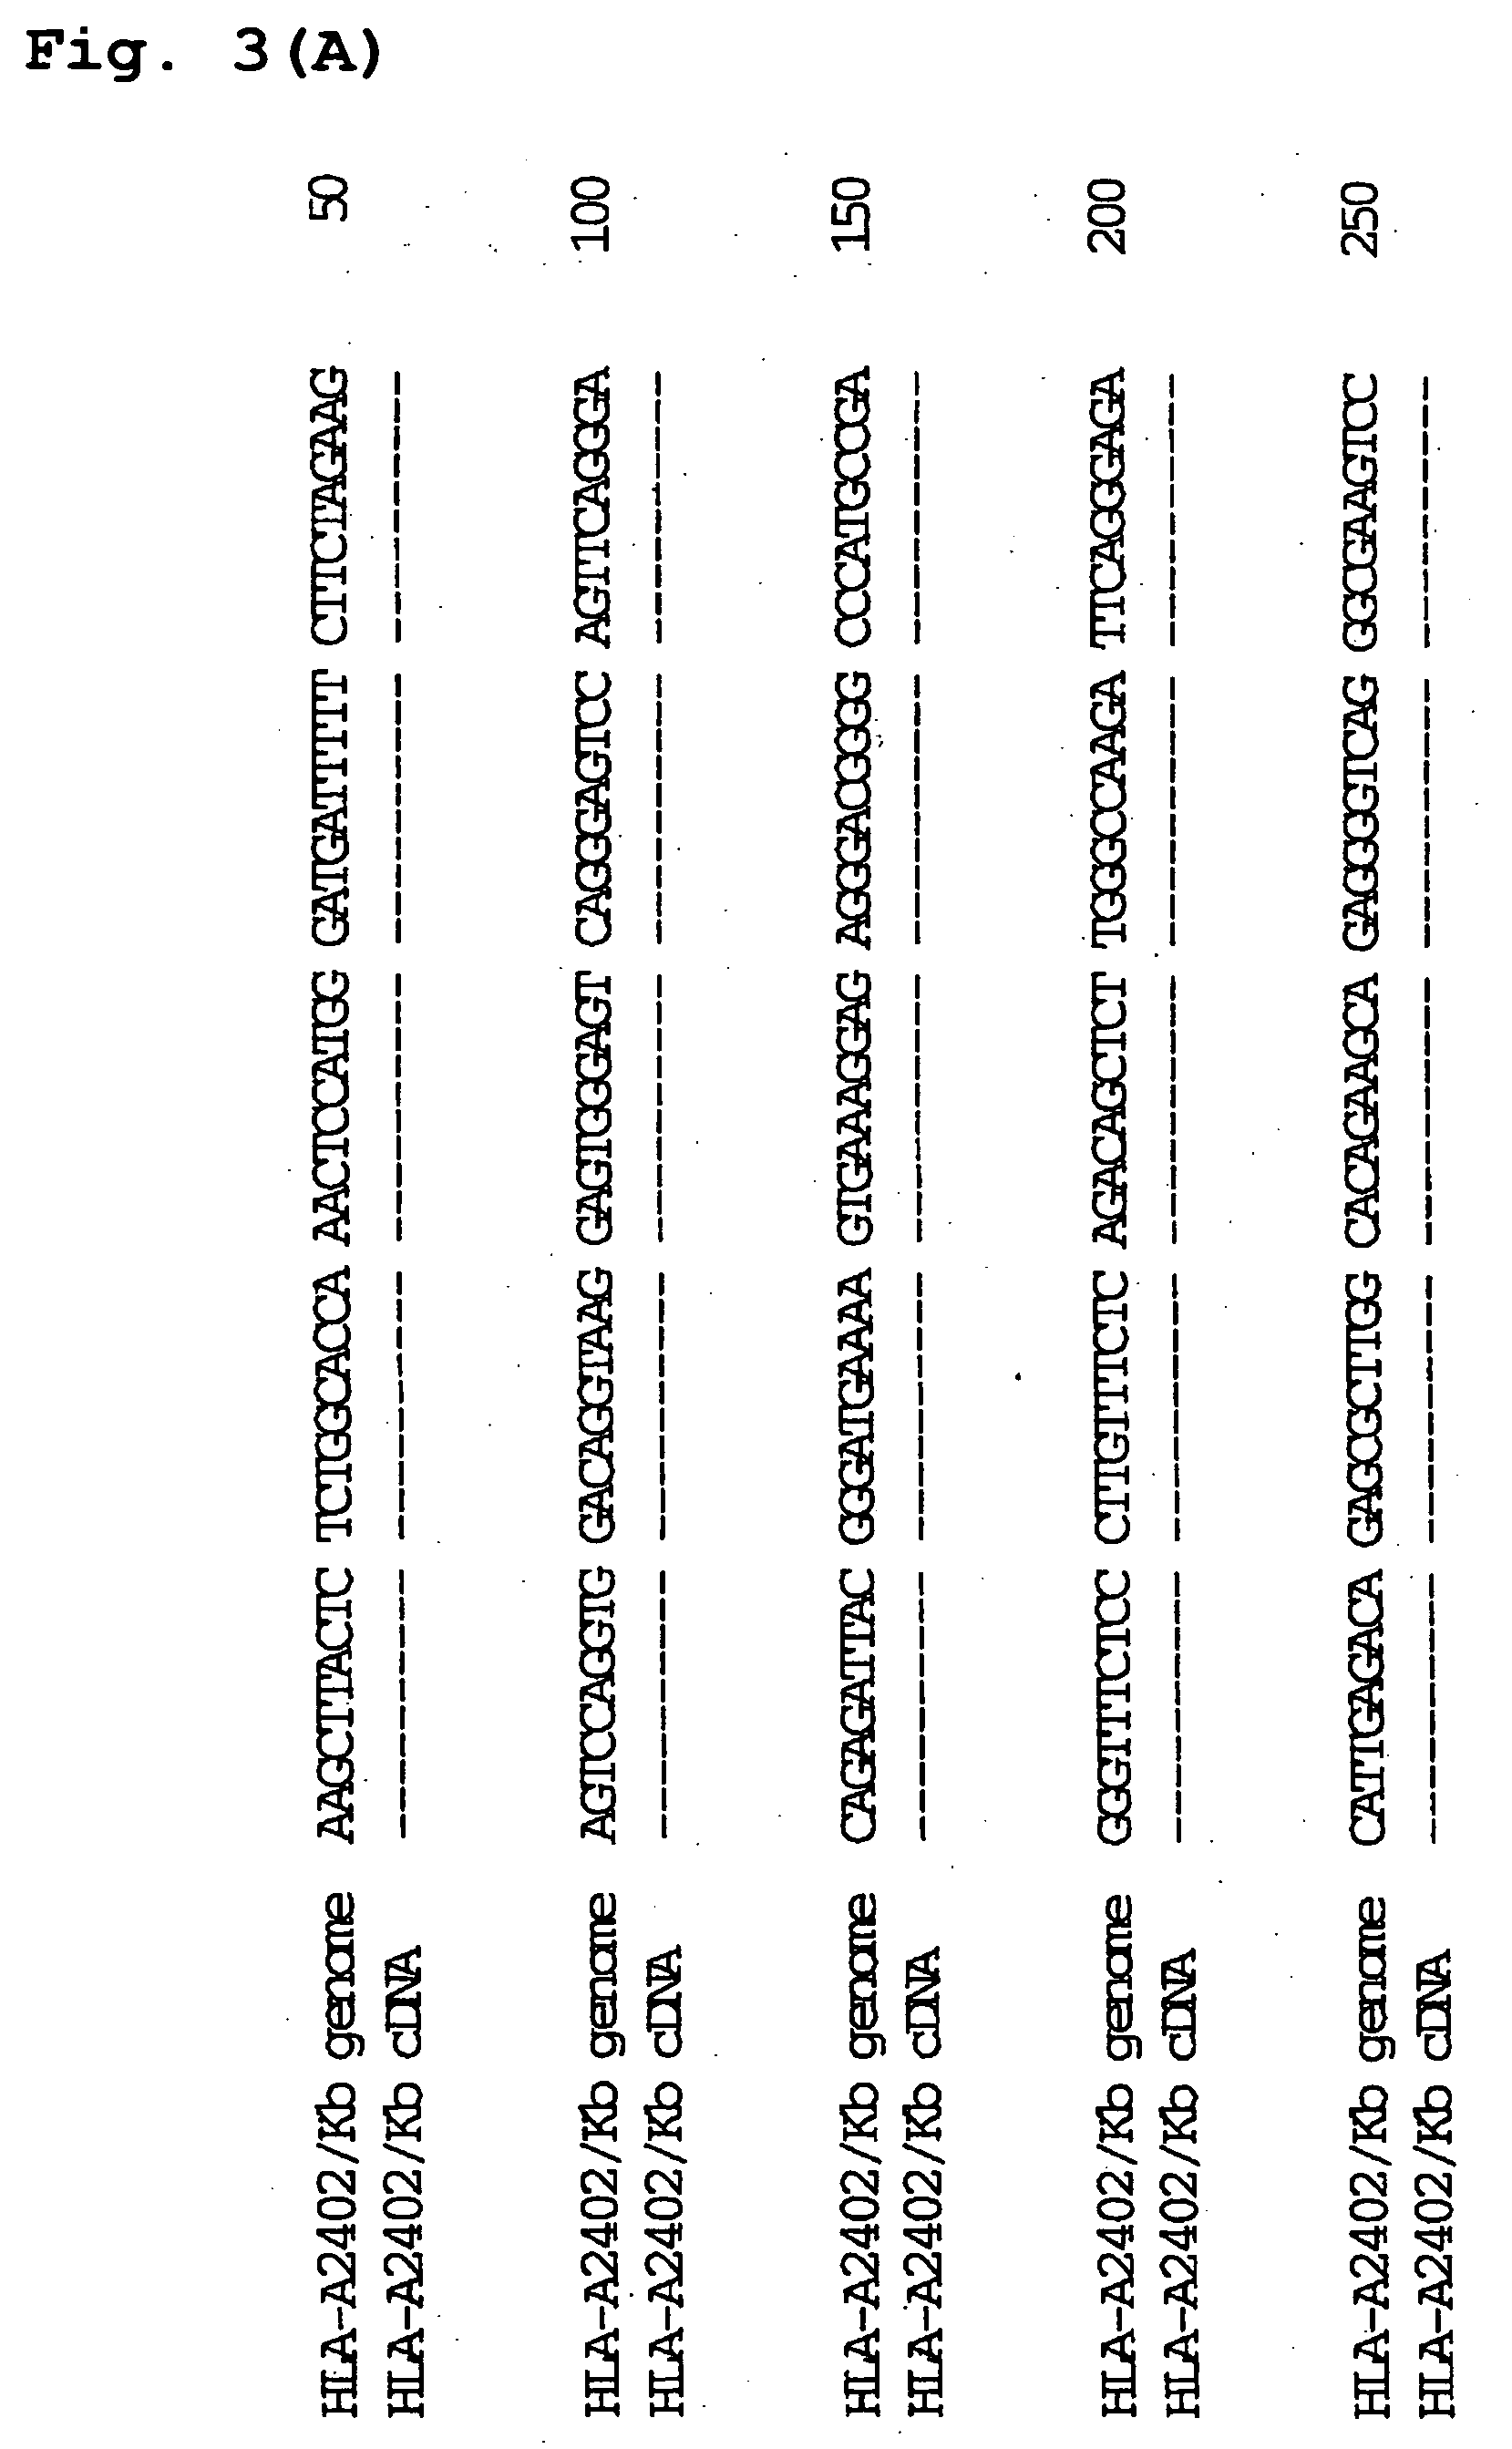 Transgenic animal expressing hla-a24 and utilization thereof